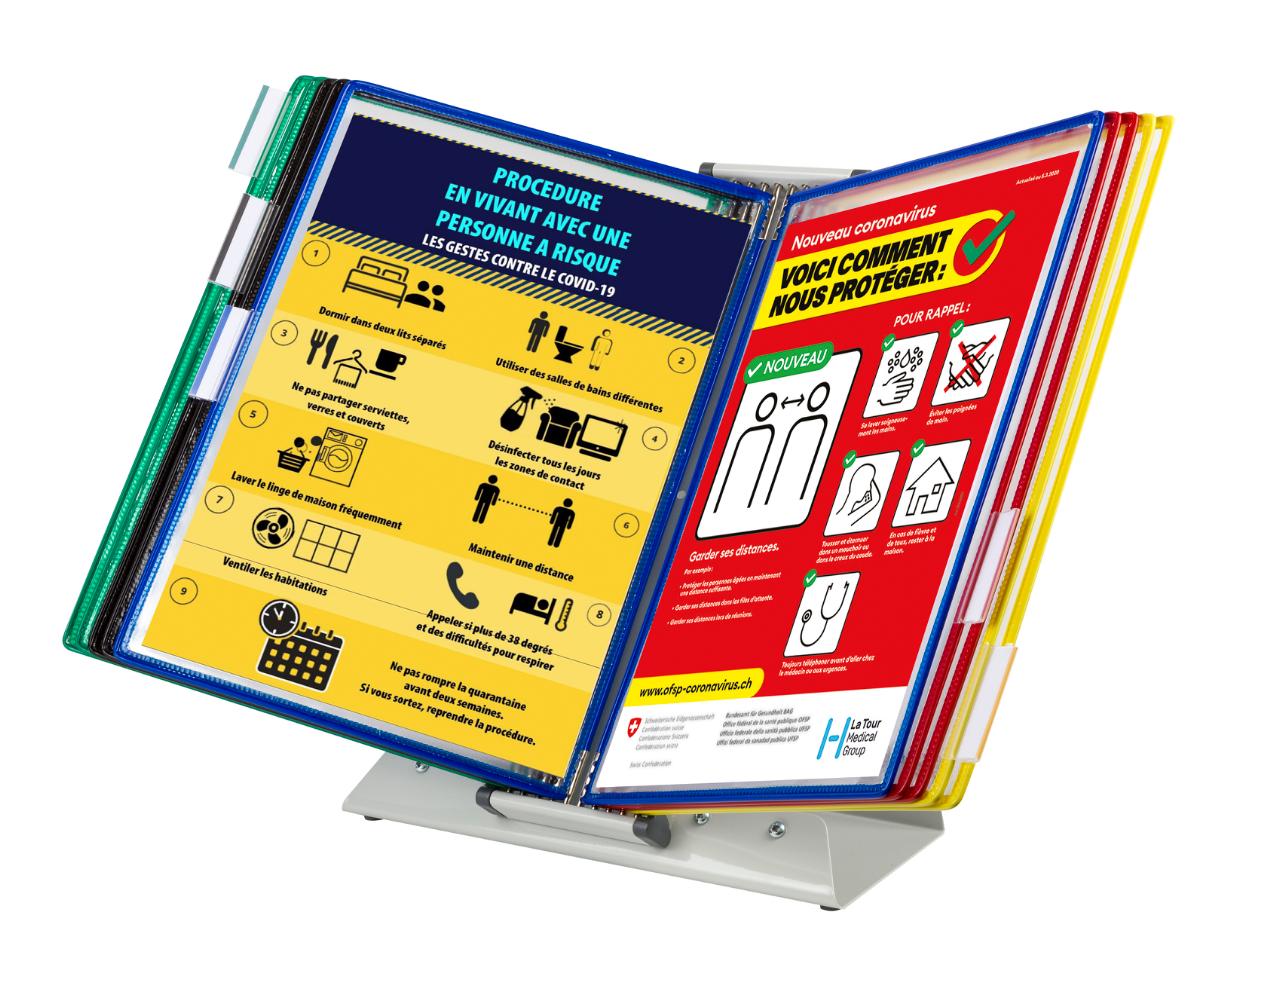 Tarifold Antimicrobial Desk Document Display System, A4, 10 Pockets